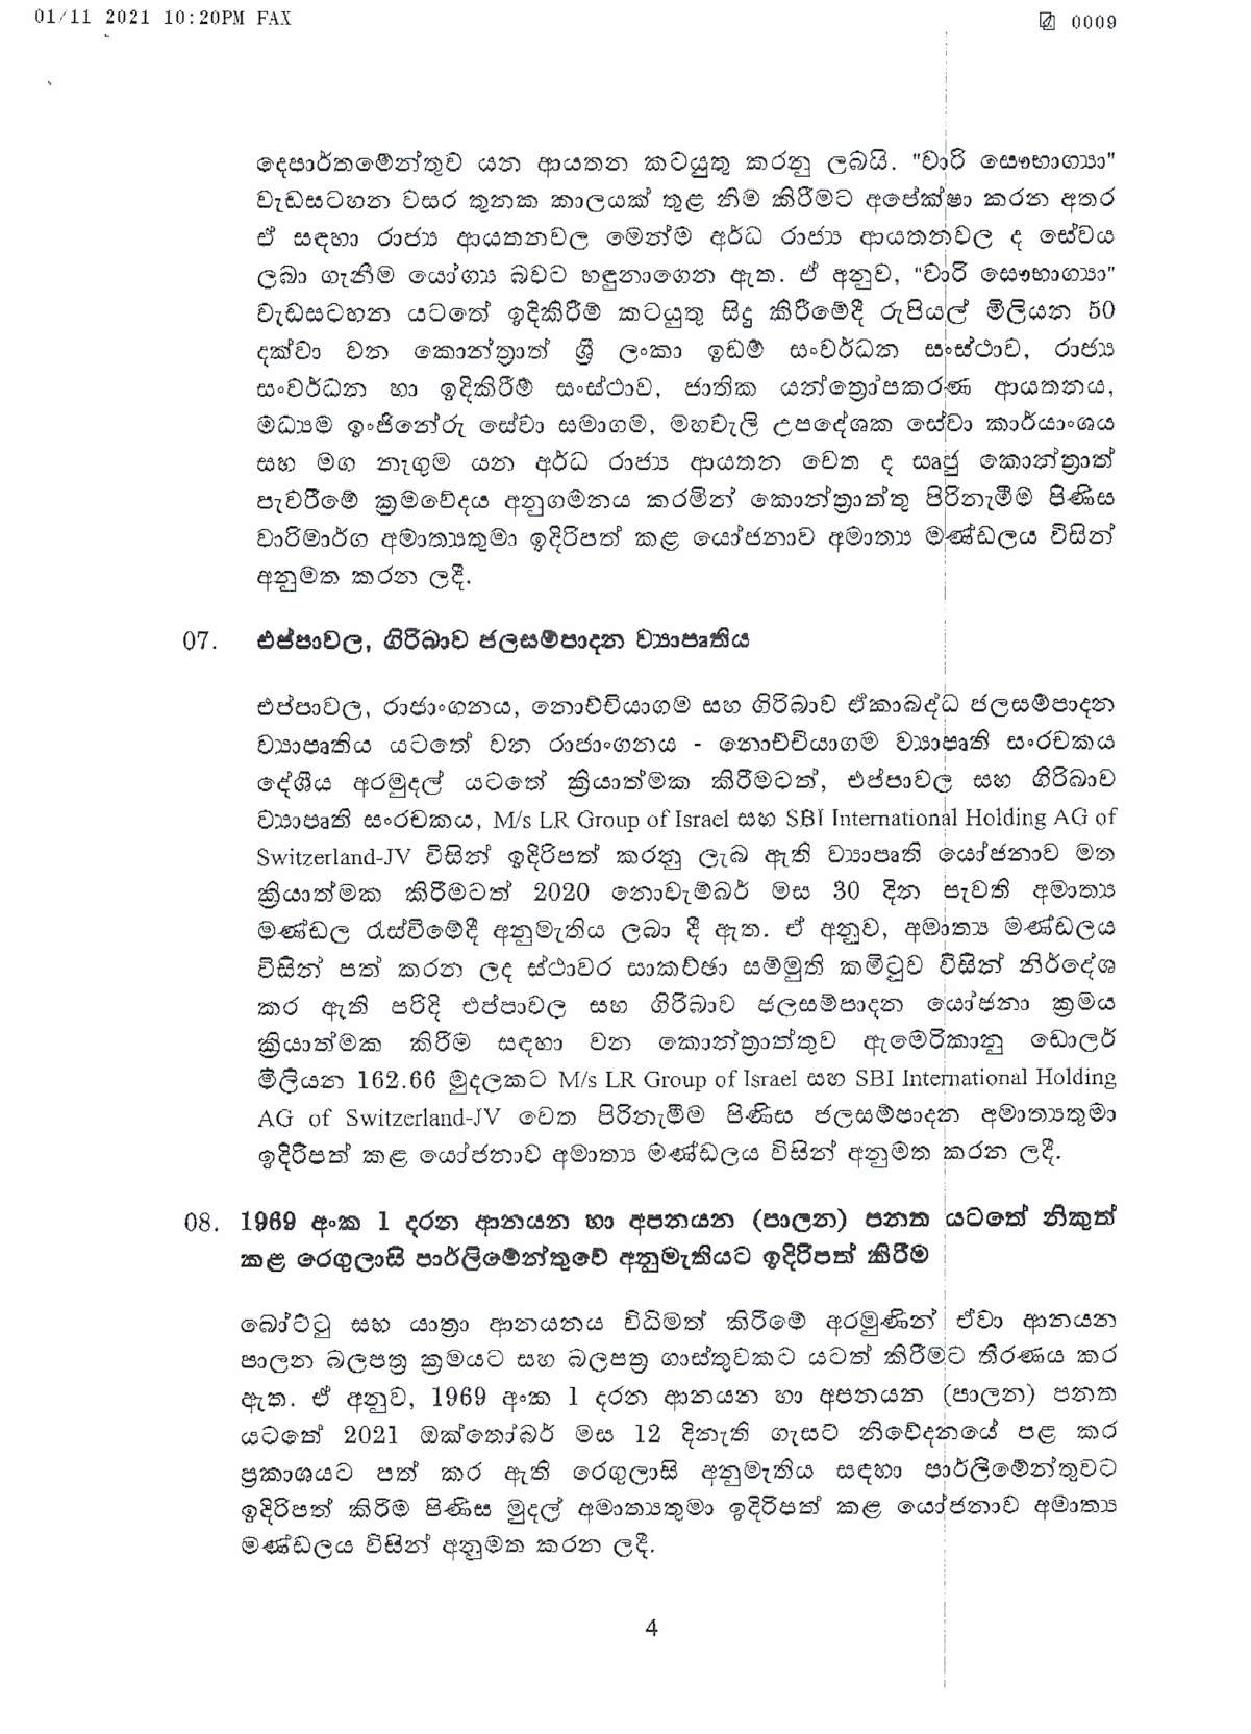 Cabinet Decisions on 01.11.2021 page 001